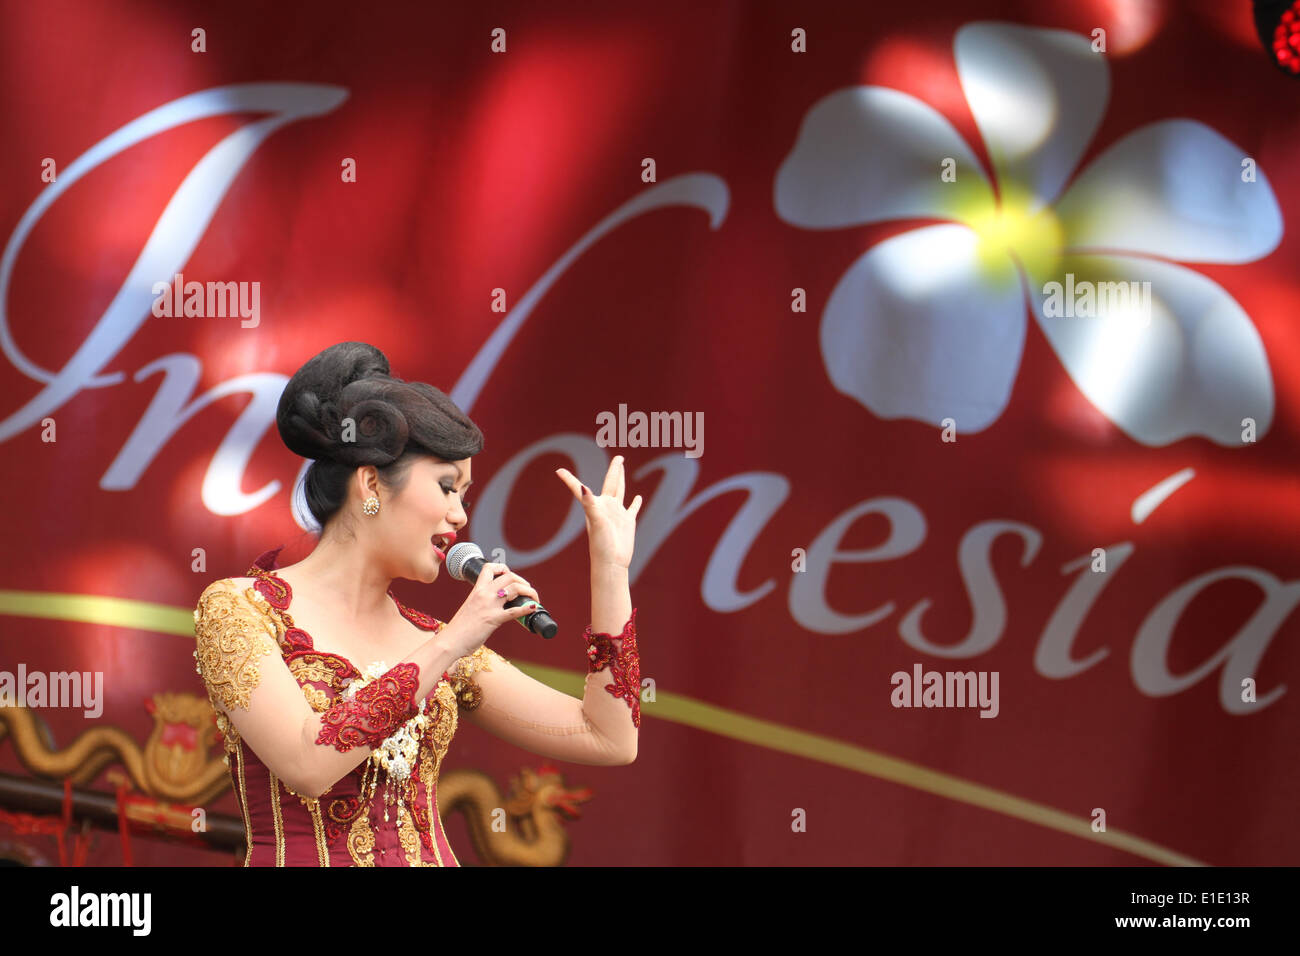 London, UK. 31 May 2014. Colour, dance and sound dominated Trafalgar Square for Indonesia. The event 'Hello Indonesia' was showcasing the vibrant culture and traditions of Indonesia.. Credit: David Mbiyu/ Alamy Live News Stock Photo